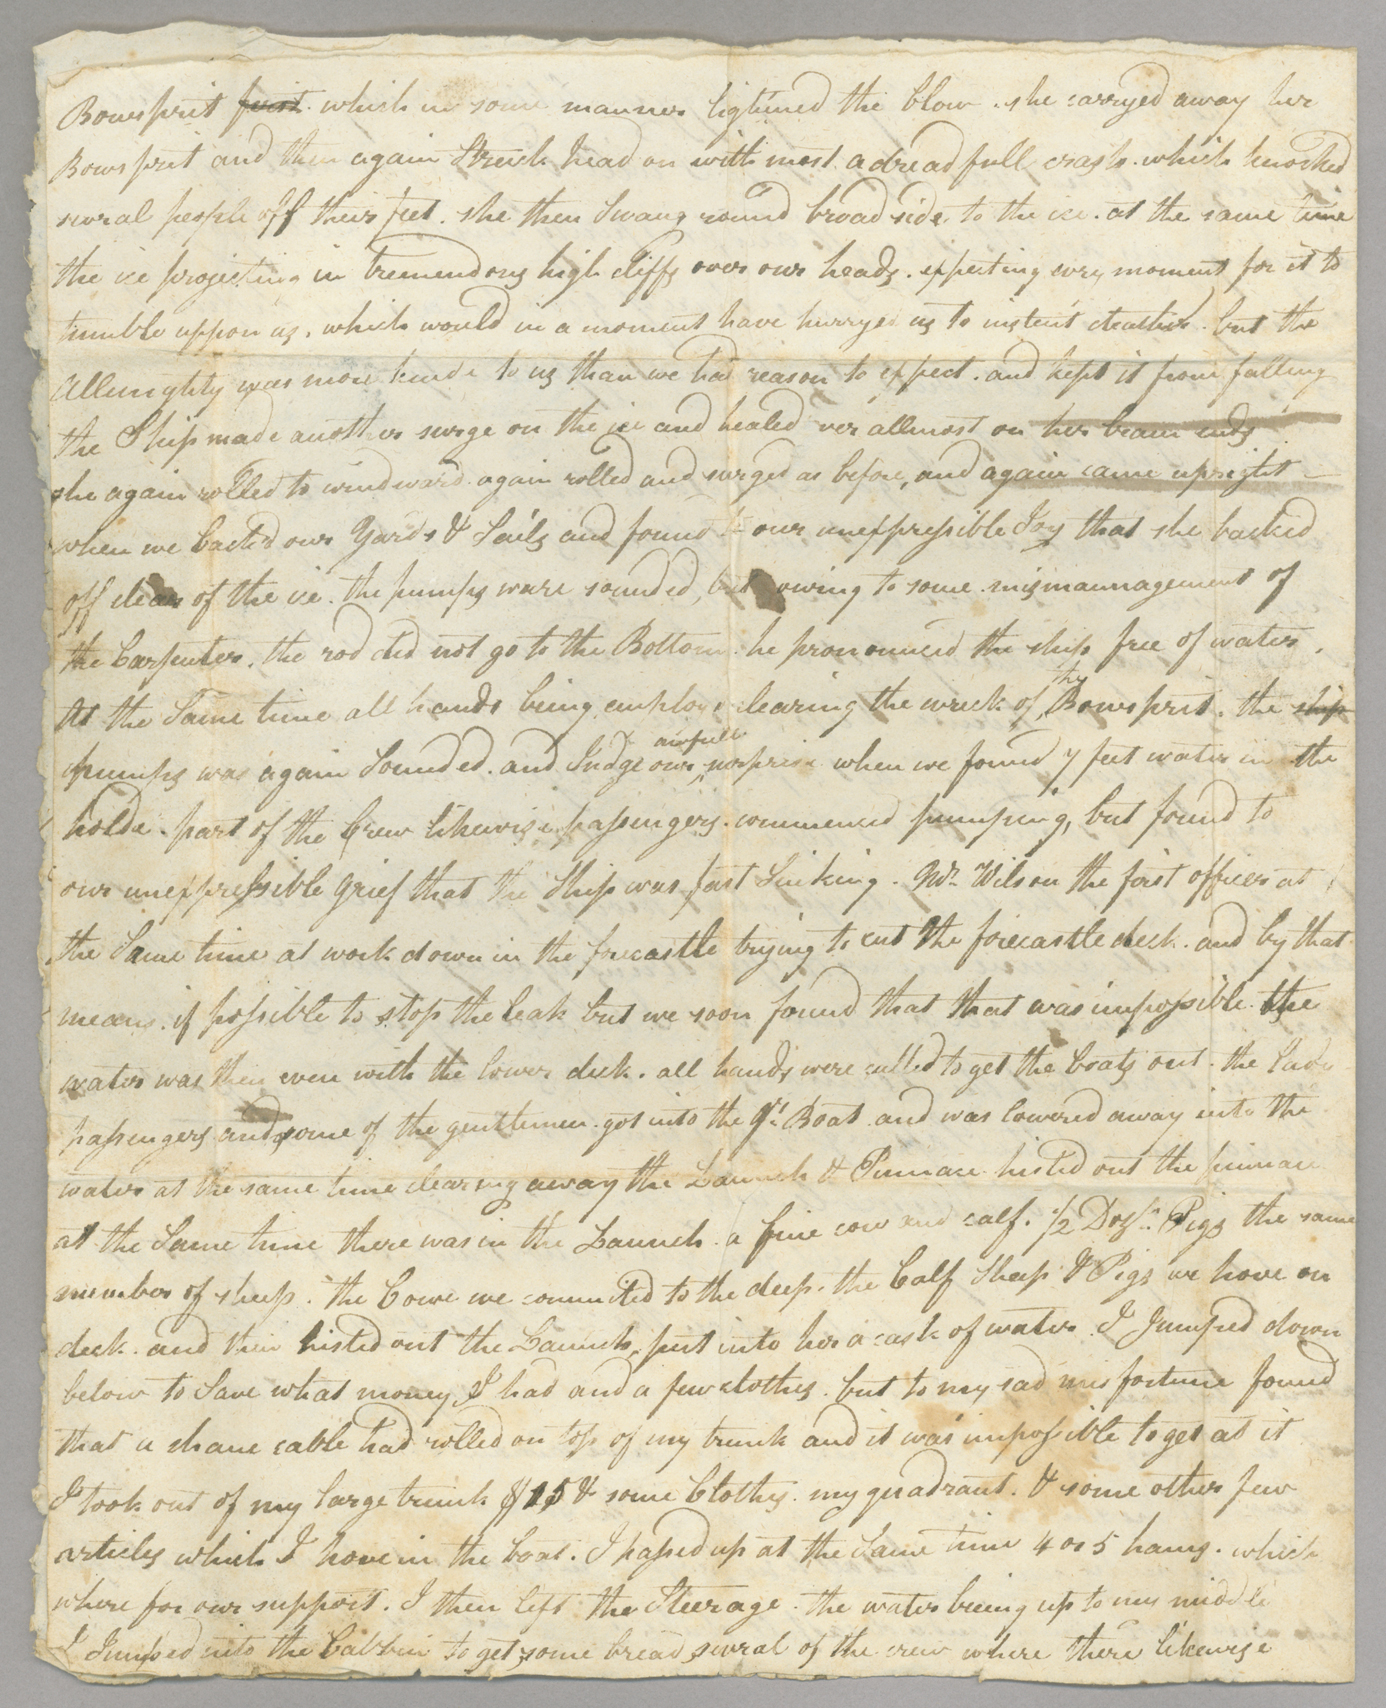 Letter, [Hewlett Townsend Coles], at sea, to "My Dear Beloved Catherine," [Catherine Van Suydam Coles], n.p., Page 4